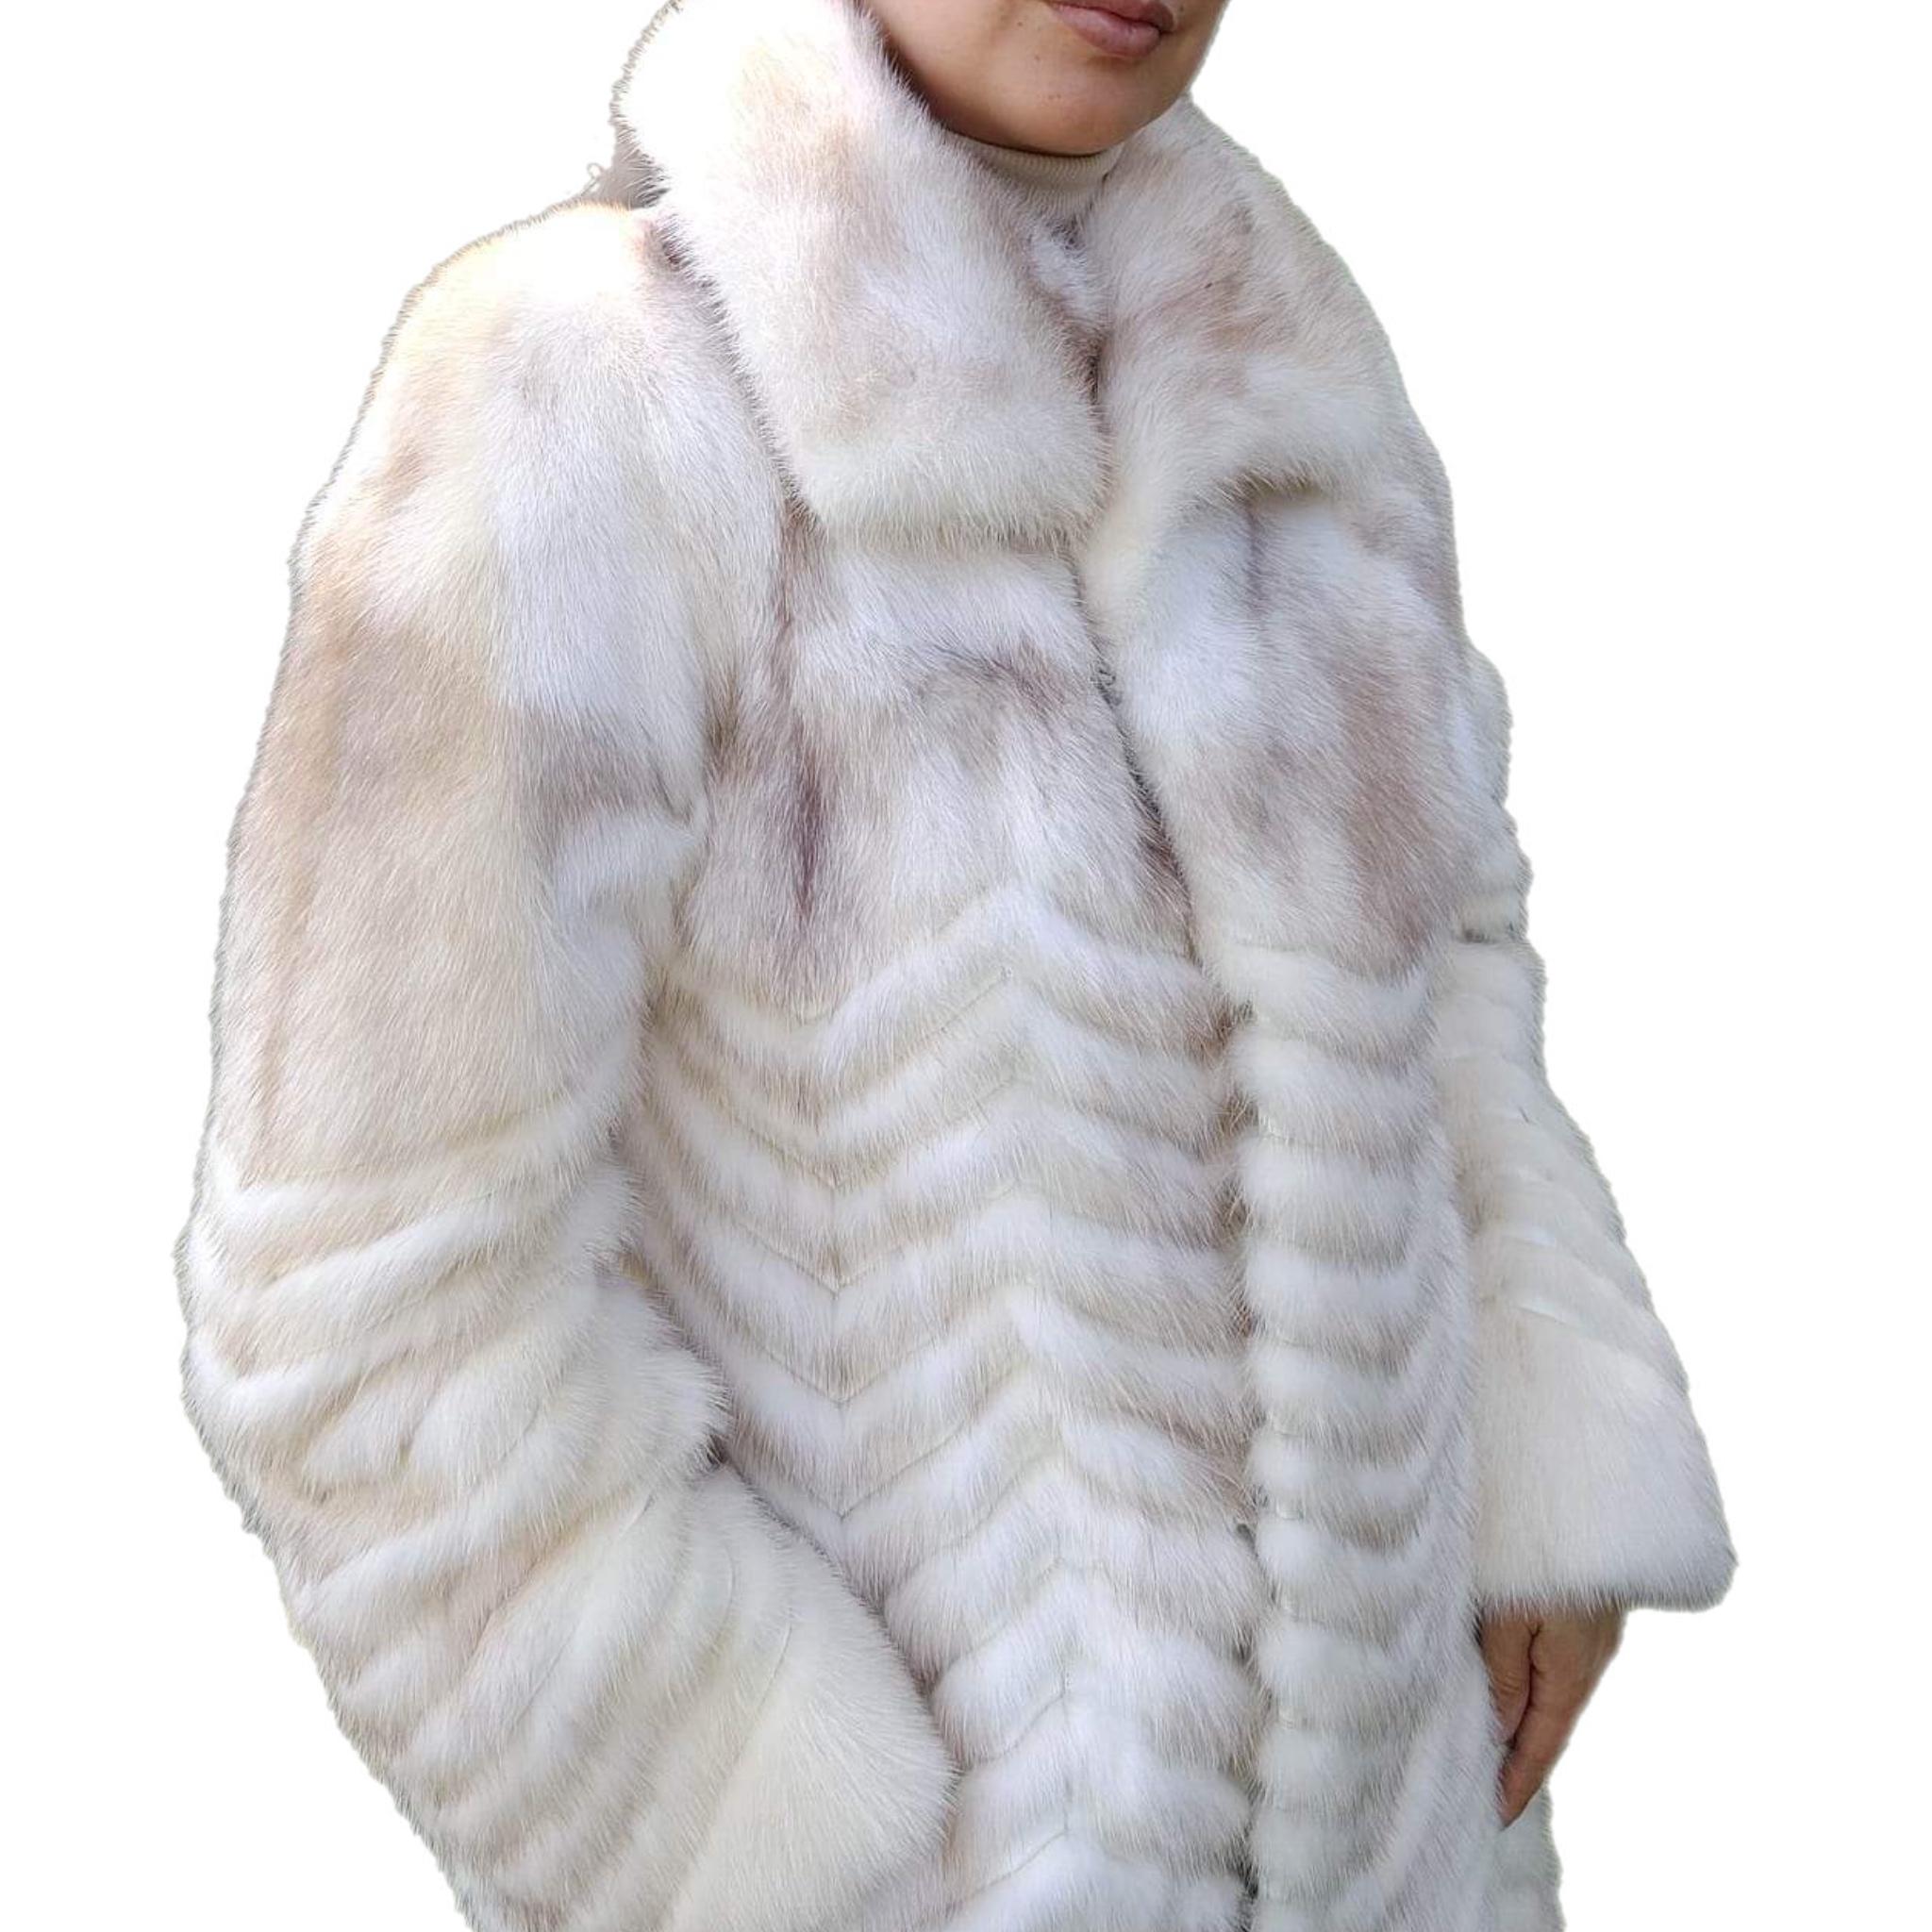 ~Unused Cross Mink white Fur Coat (Size 6- s) 

When it comes to fur, Holt Renfrew is the ultimate reference in quality and style. This stunning cross mink coat is a classic with the chevron design. It has a tailored collar and a overall white color